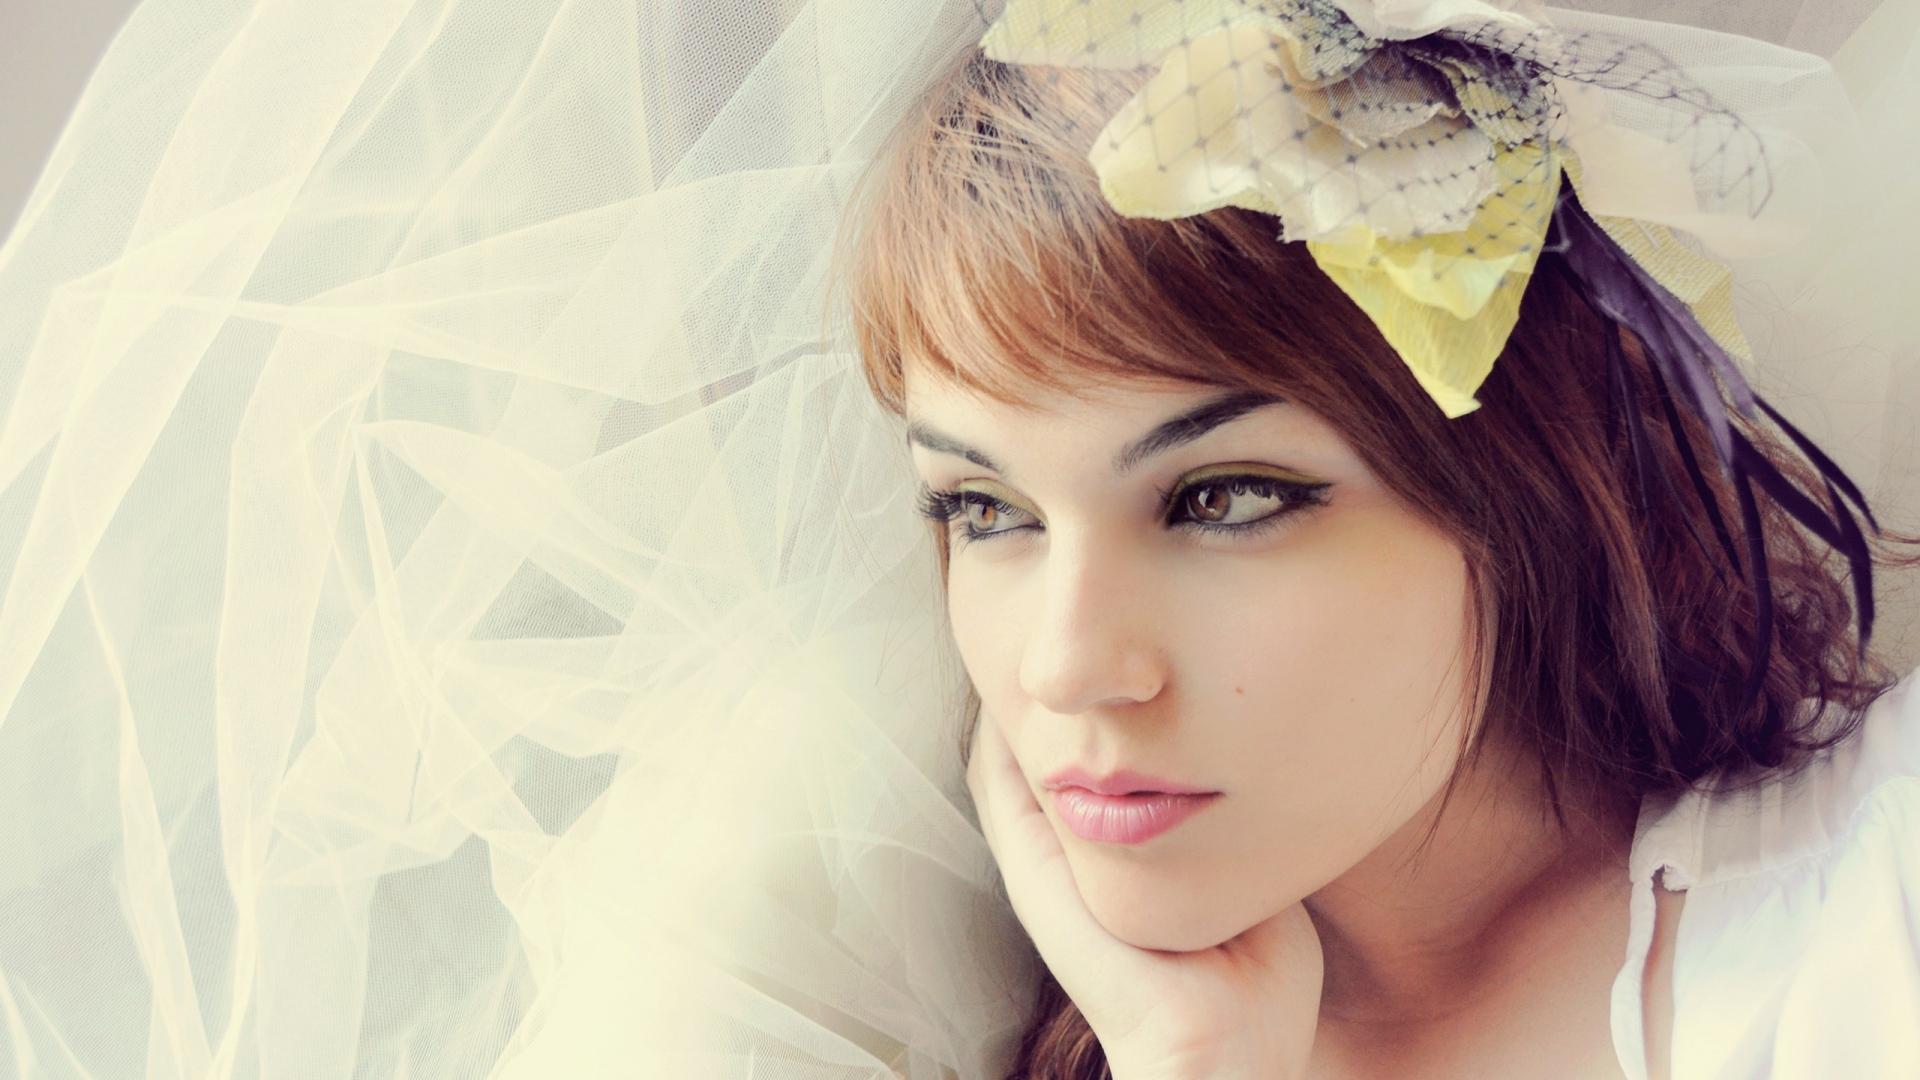 Download Wallpaper 1920x1080 Girl, Veil, Style, Beautiful, Face ...